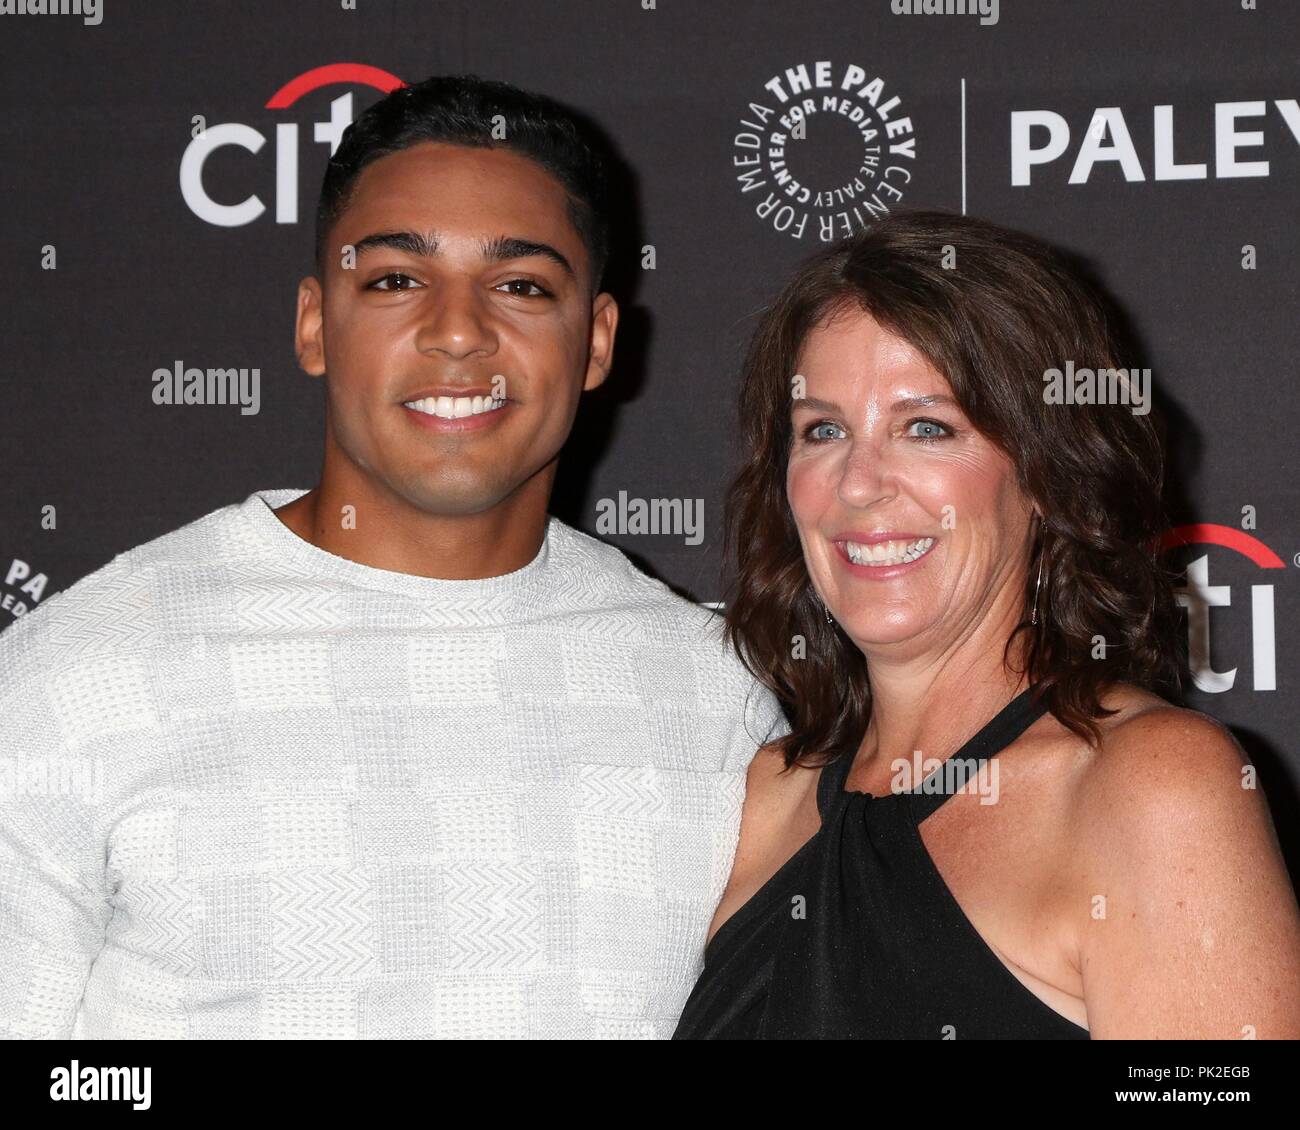 Beverly Hills, CA. 8th Sep, 2018. Michael Evans Behling, Carol Behling at arrivals for The CW Presents ALL AMERICAN and CHARMED at the 12th Annual PaleyFest Fall TV Previews, Paley Center for Media, Beverly Hills, CA September 8, 2018. Credit: Priscilla Grant/Everett Collection/Alamy Live News Stock Photo